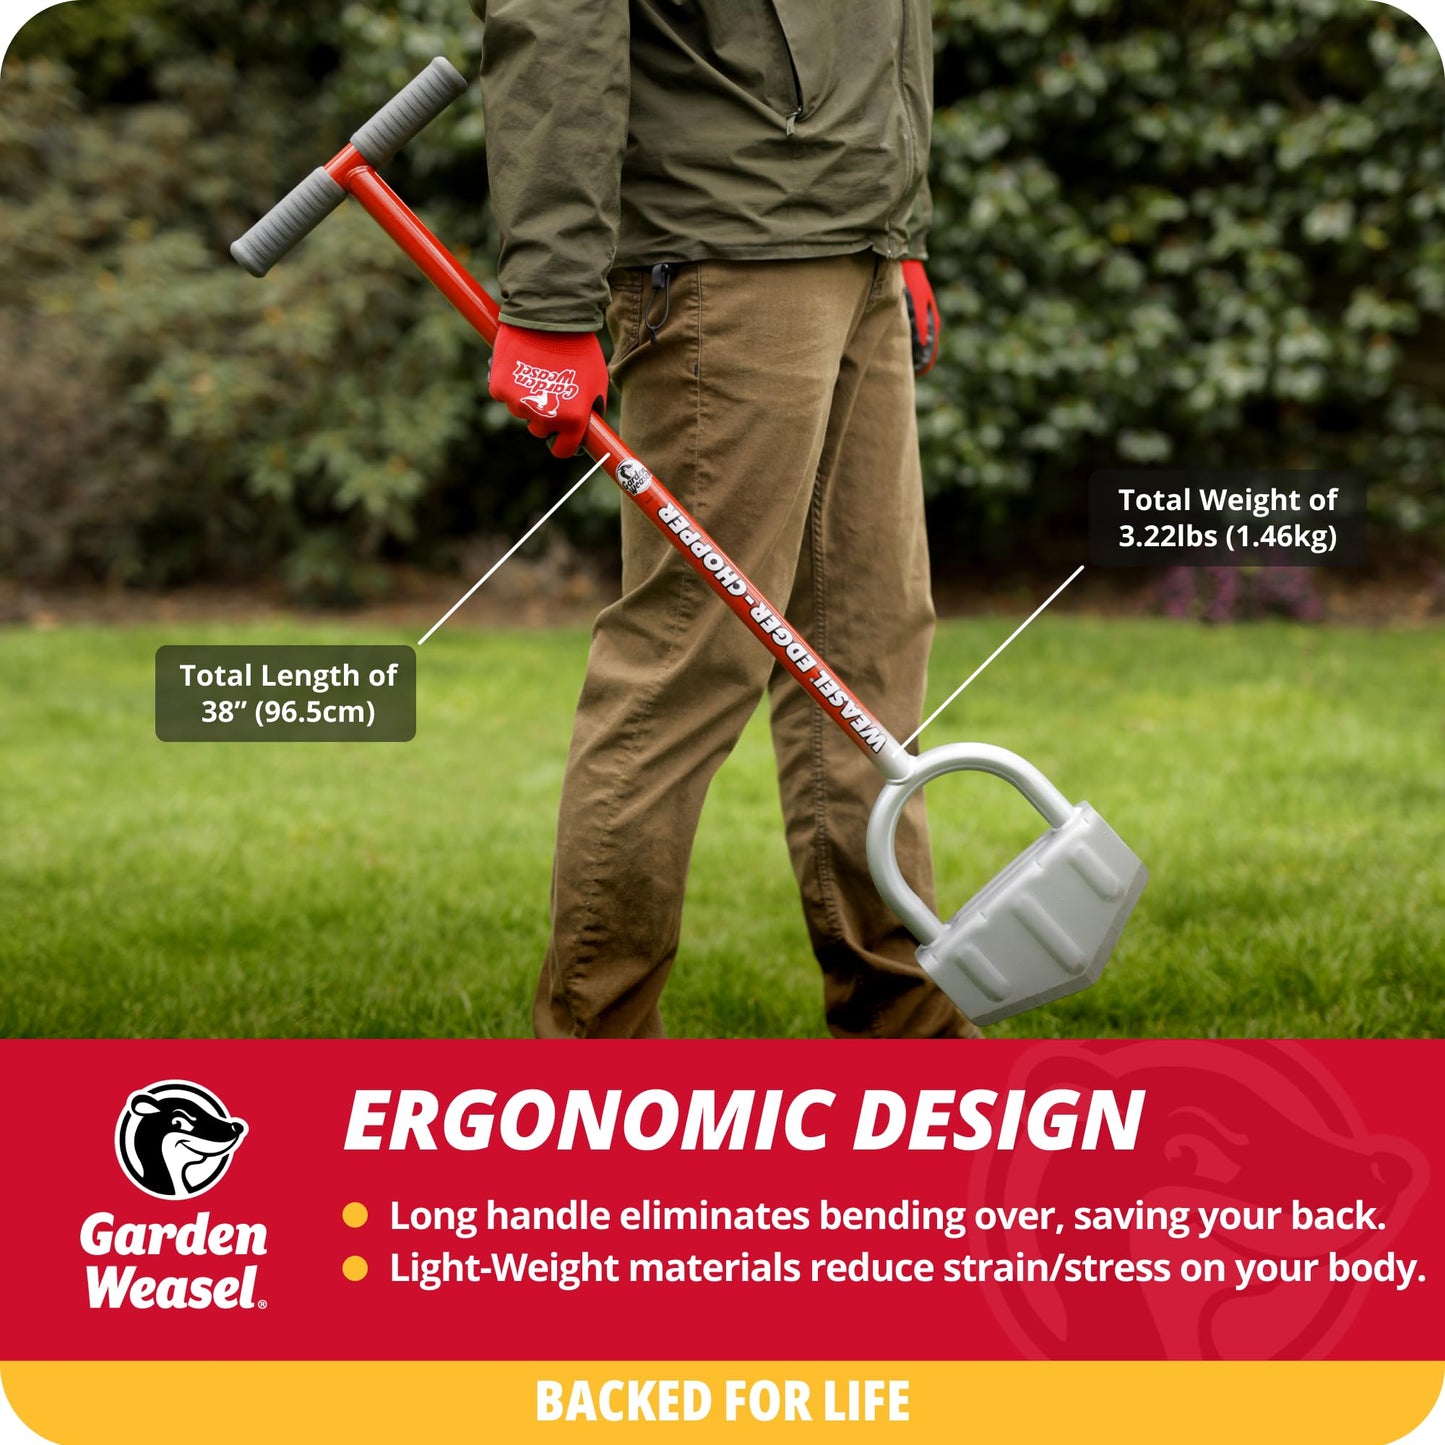 Garden Weasel Edger-Chopper - Long Handle | Garden Beds, Patios, Trenches, Sidewalks, Driveways, and More | Lawn and Landscaping Tool, T Grip, Sod Cutter | 91714